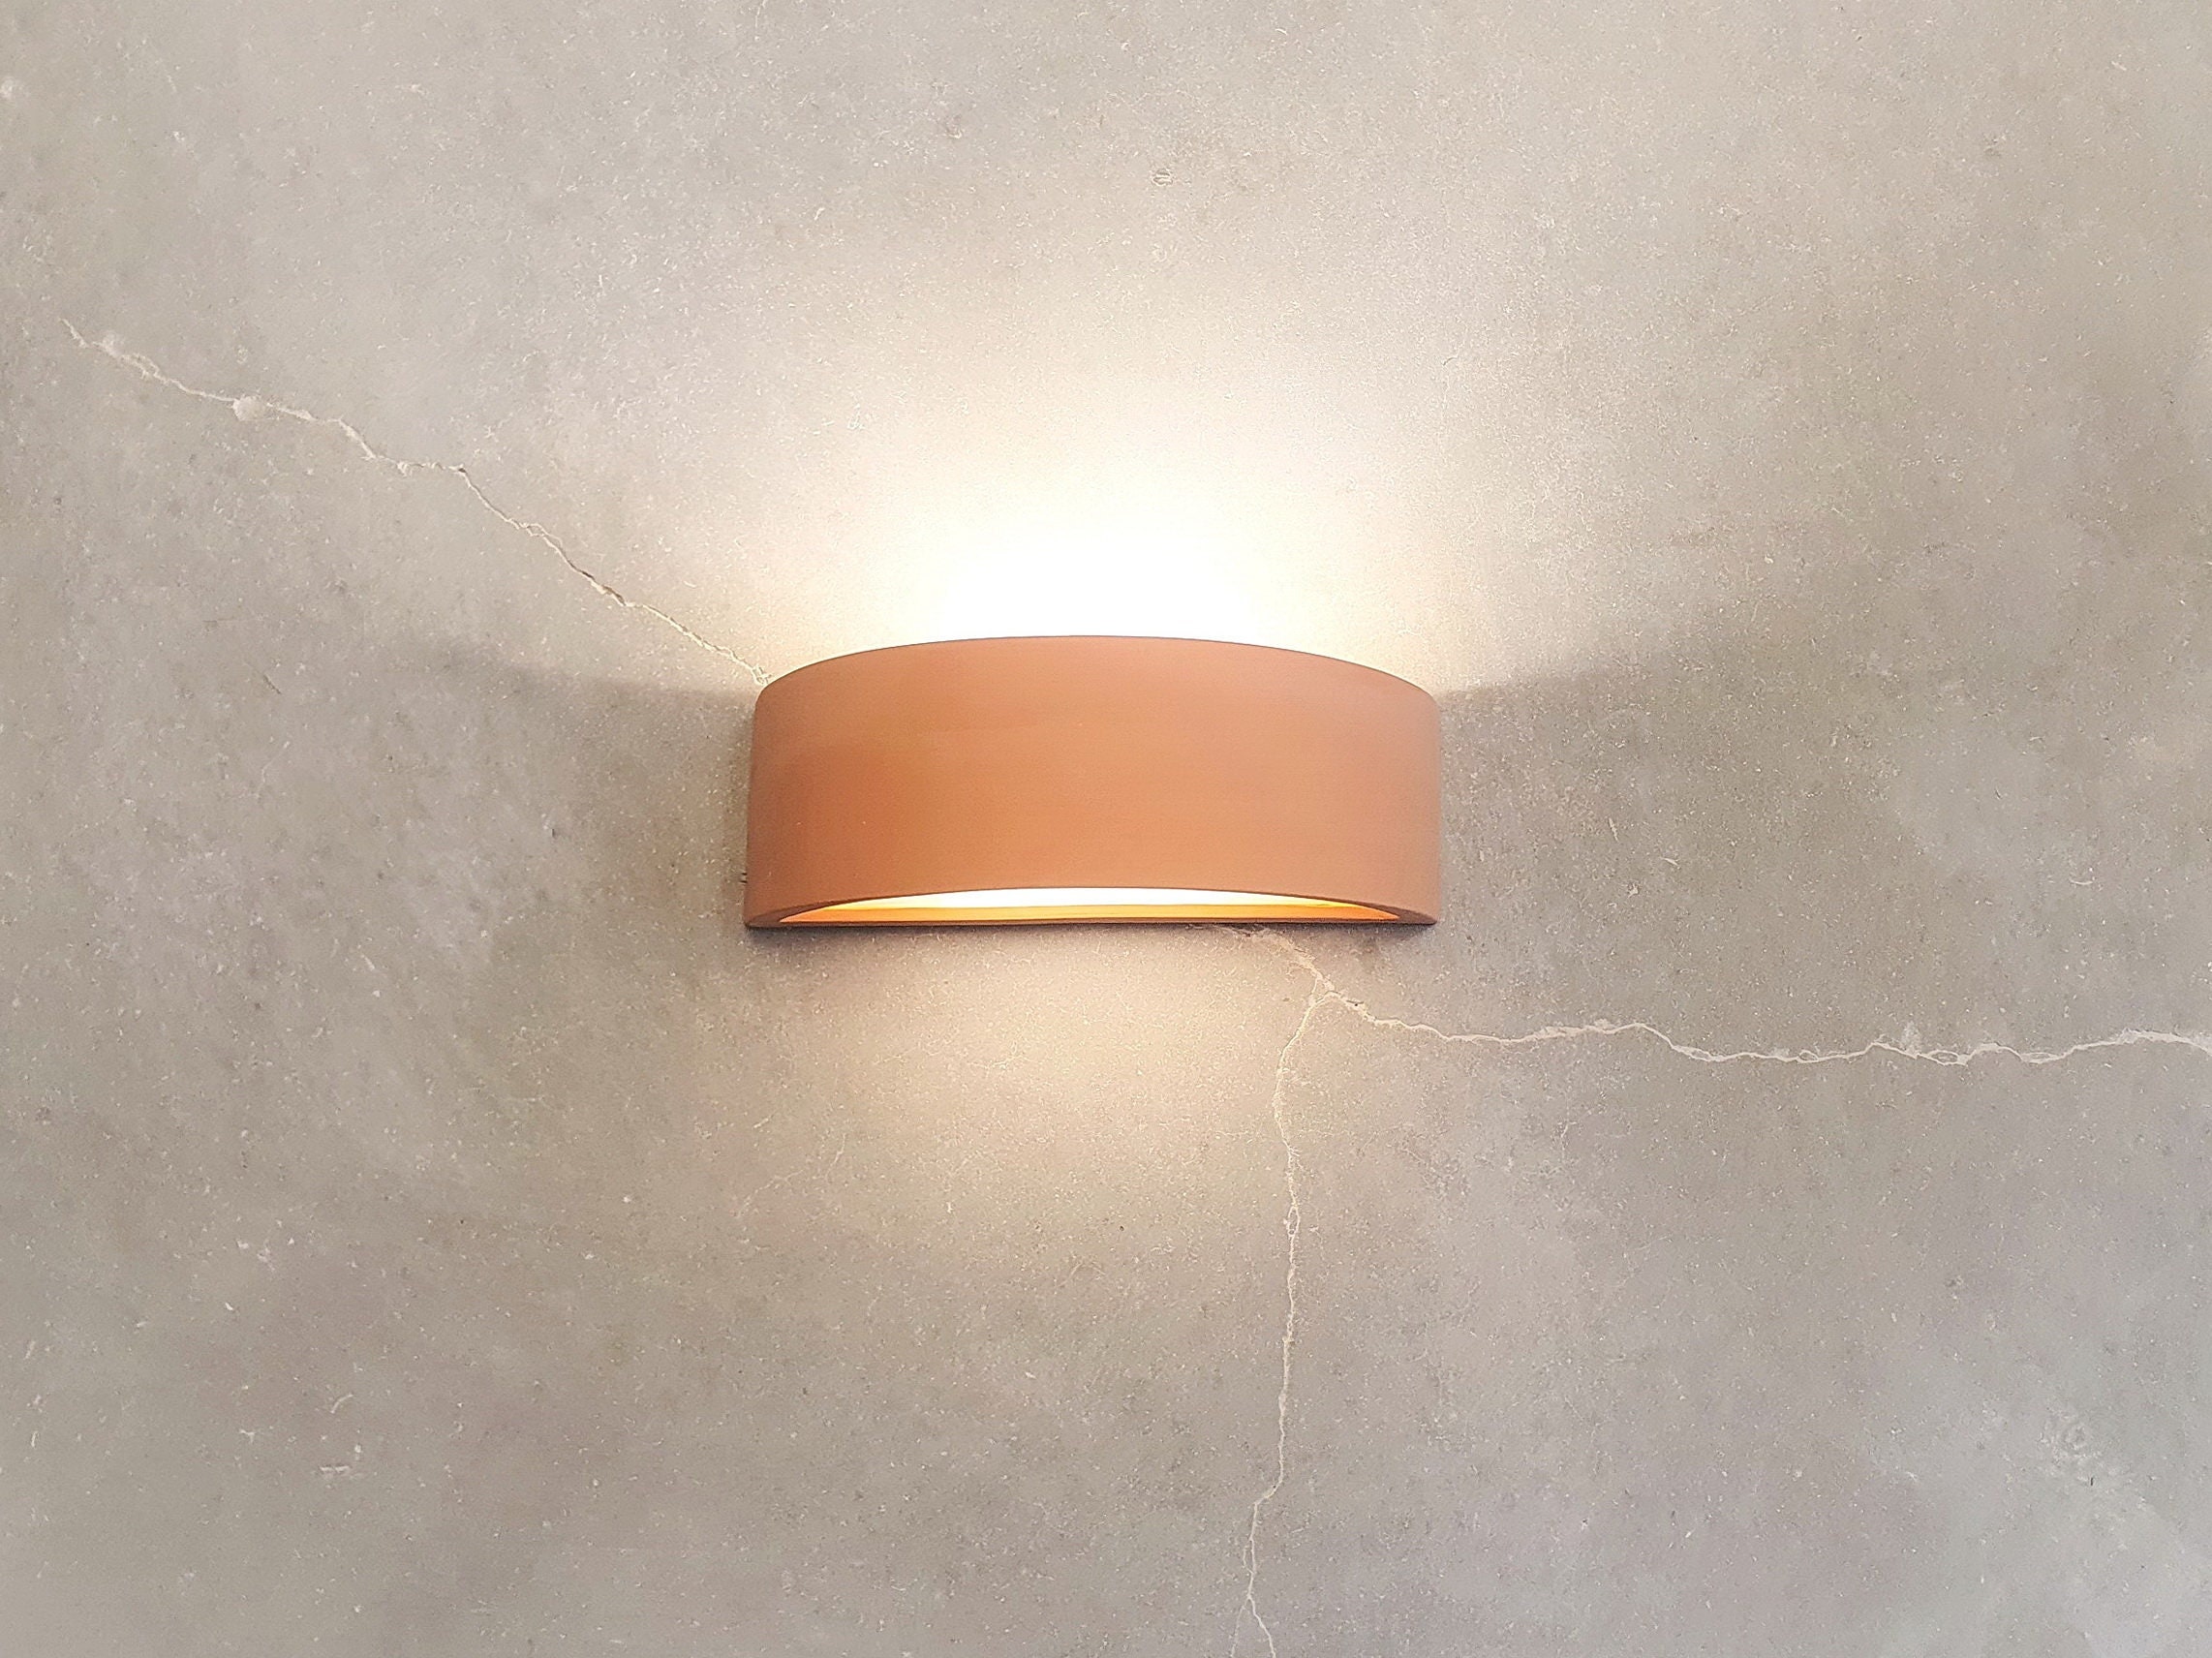 Shape Wall Wall Terracotta - Light. Etsy , Sconce Sconce, Mount ,ceramic Shades Wall Lamp Wall Fixture Decorative ,arch Light Wall